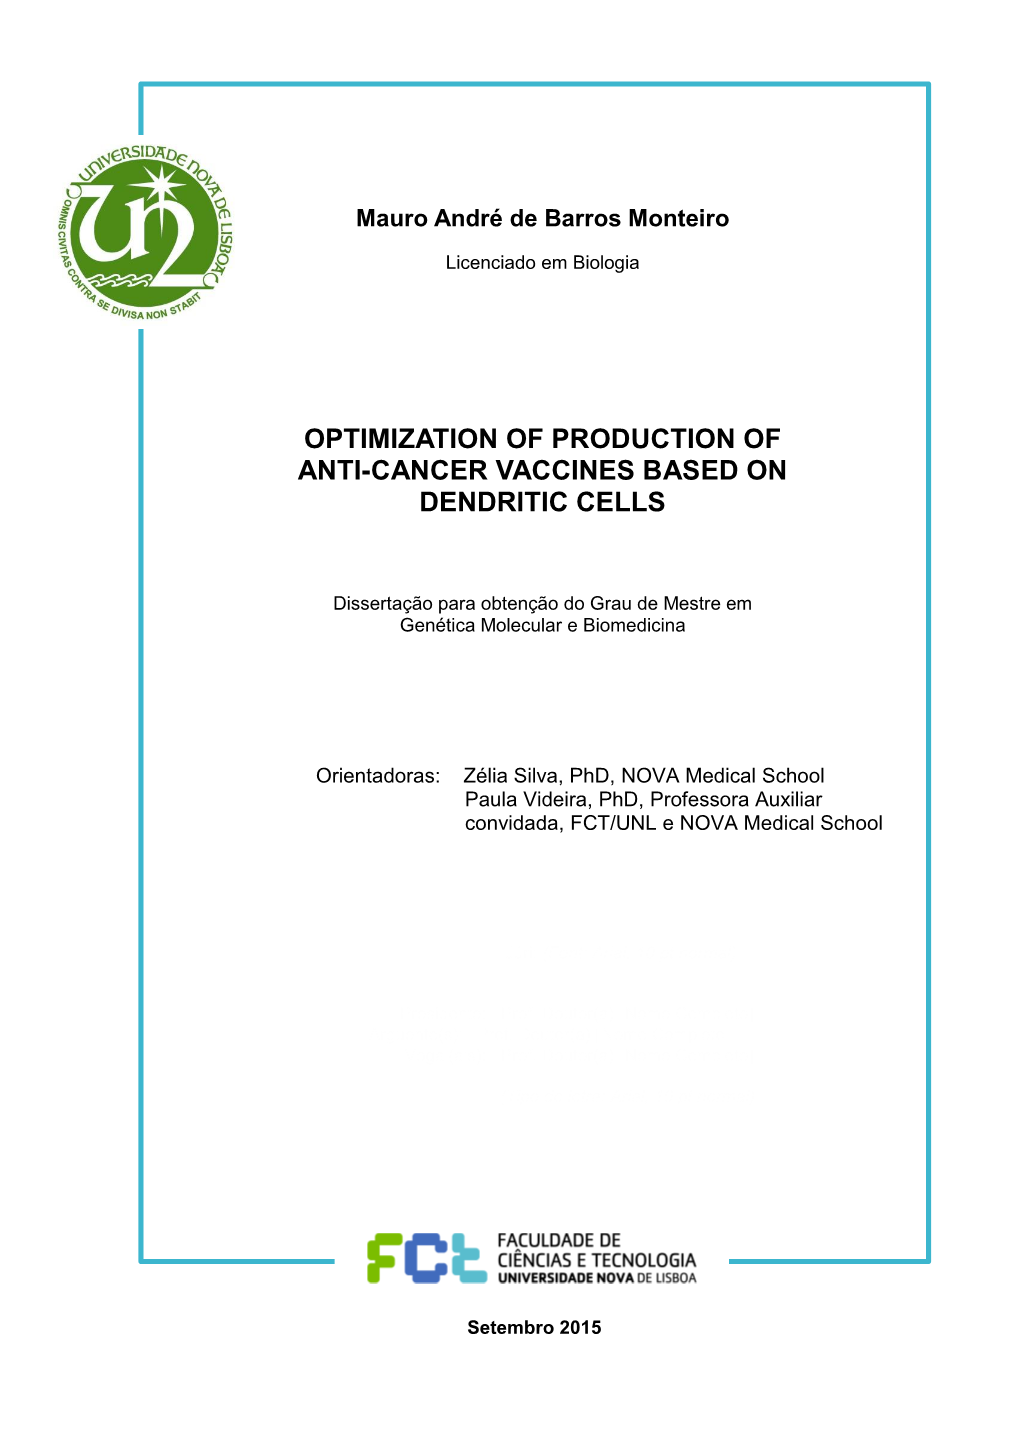 Optimization of Production of Anti-Cancer Vaccines Based on Dendritic Cells